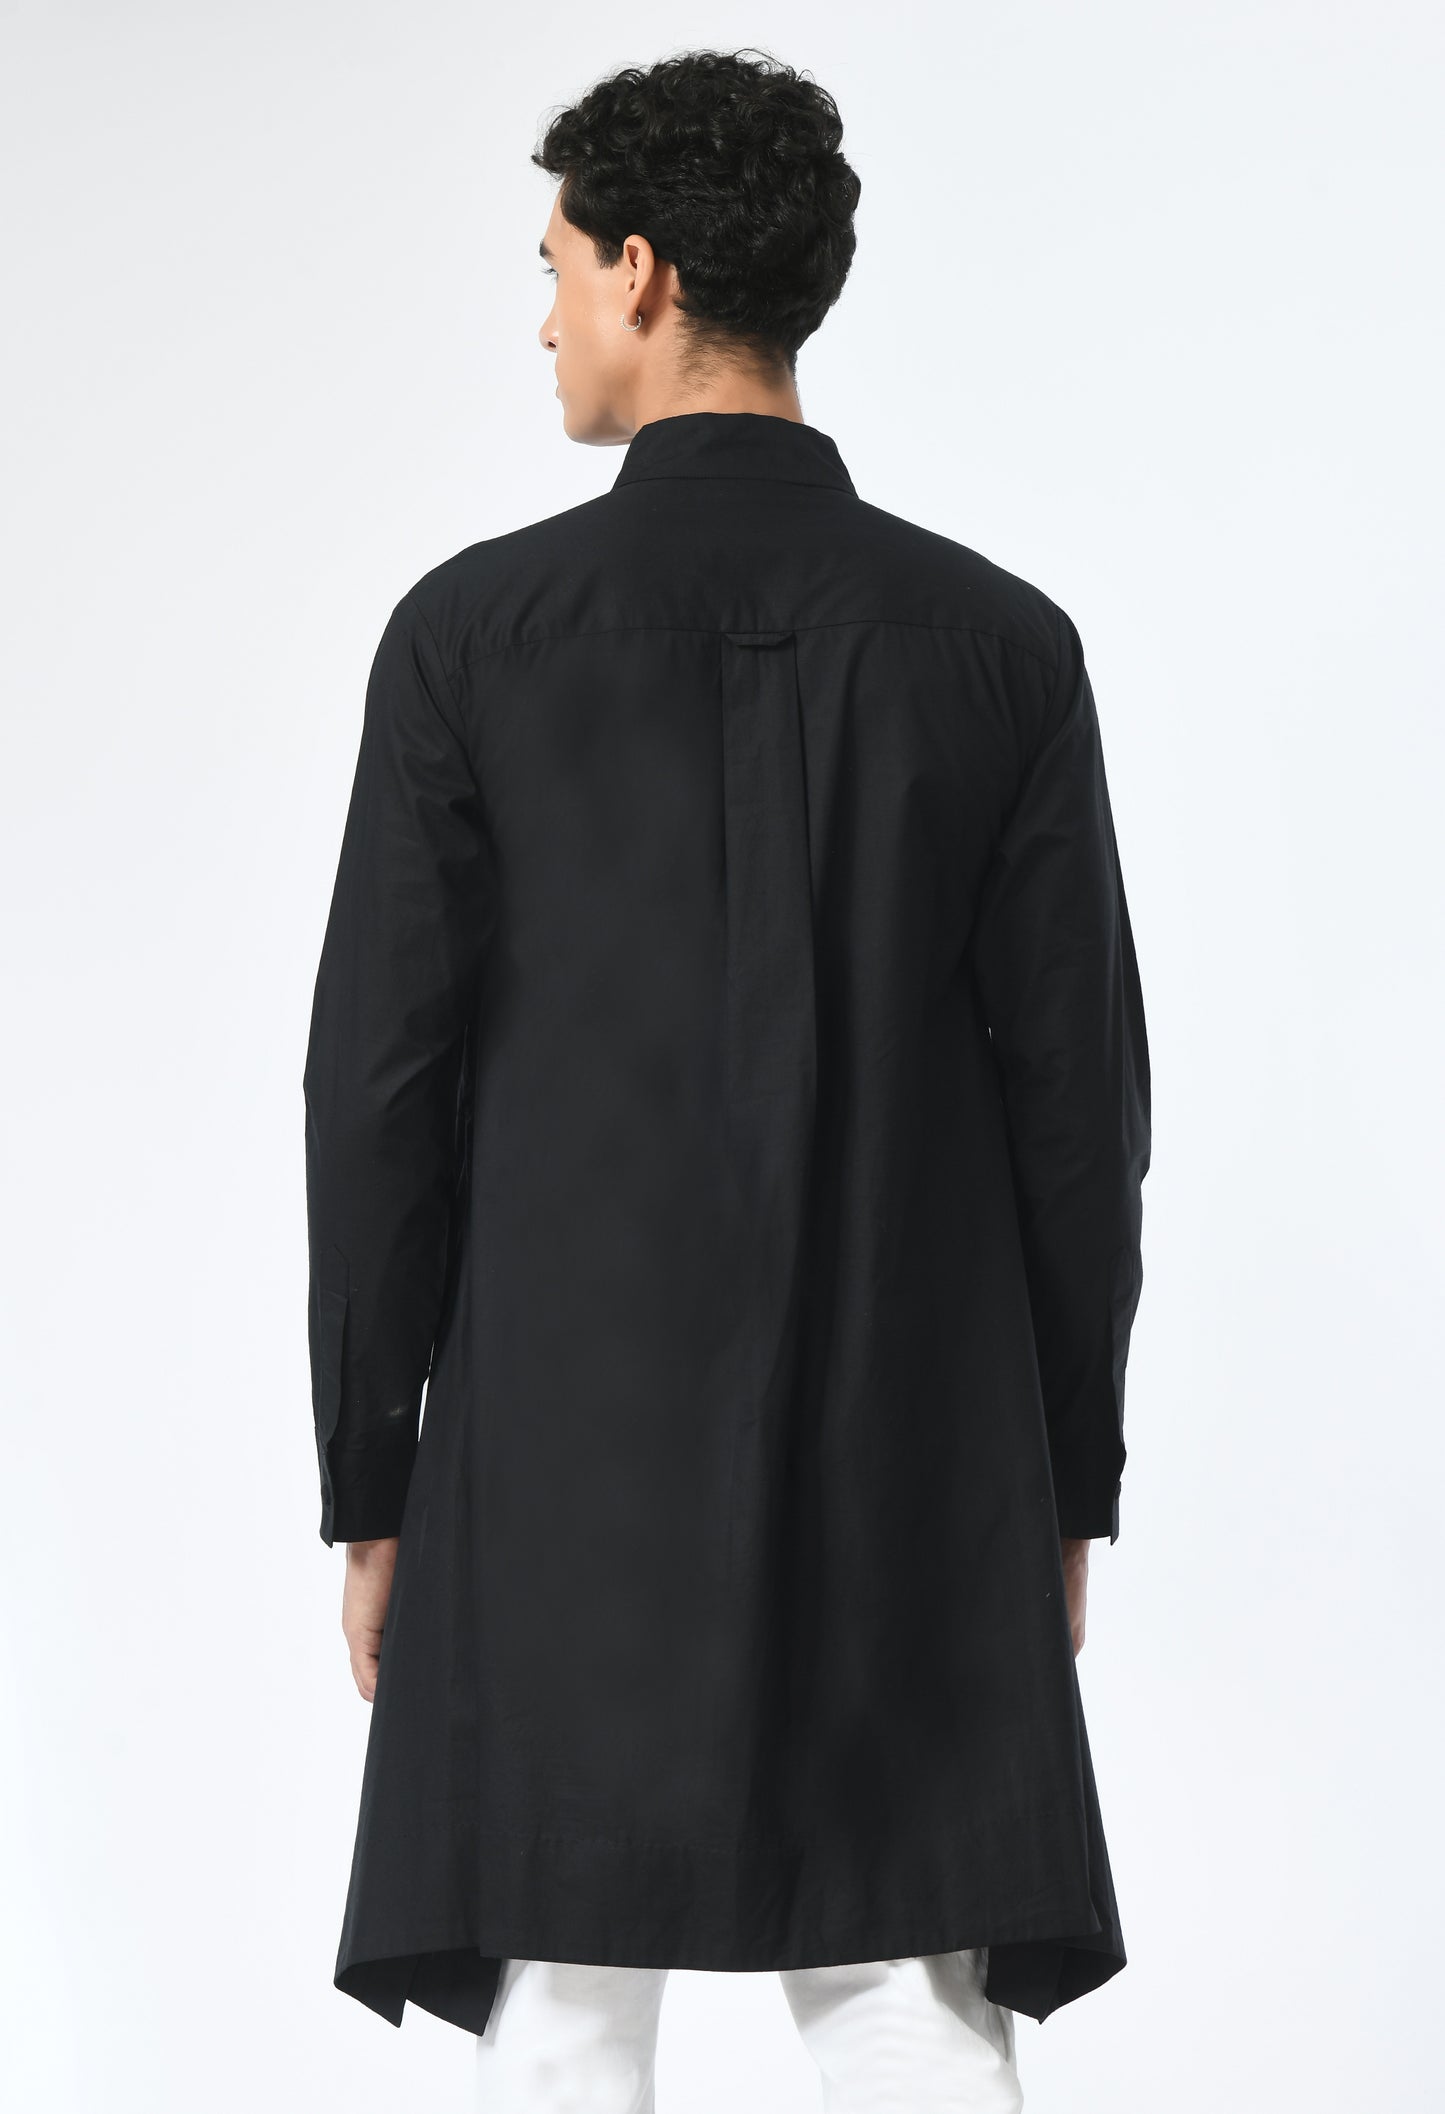 Long unisex black shirt, with a round closed Chinese collar.